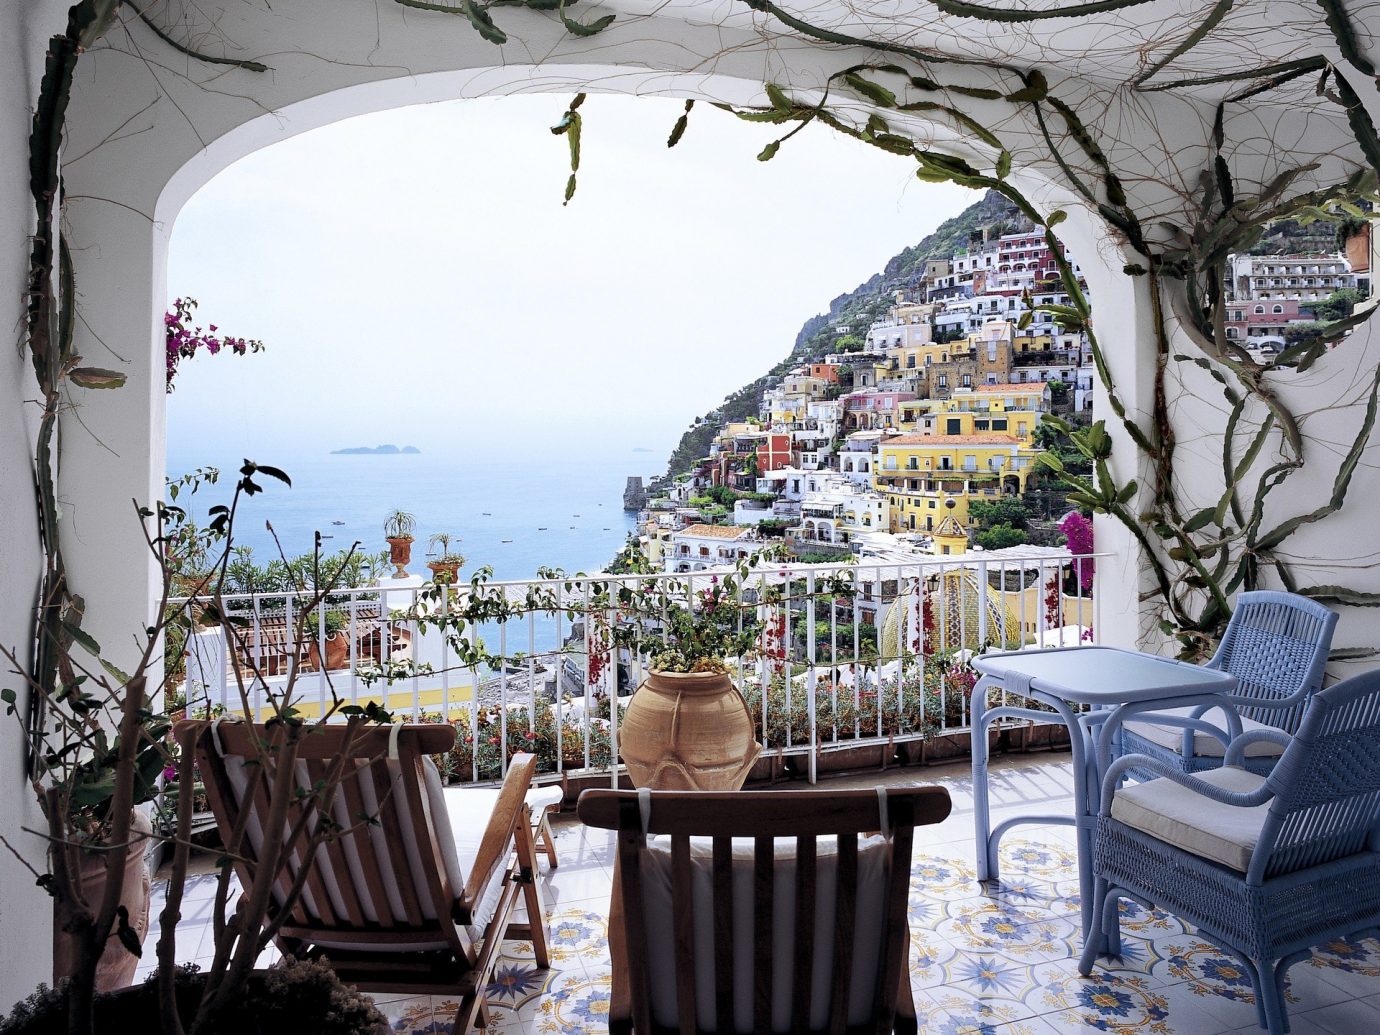 View of Positano from Le Sirenuse